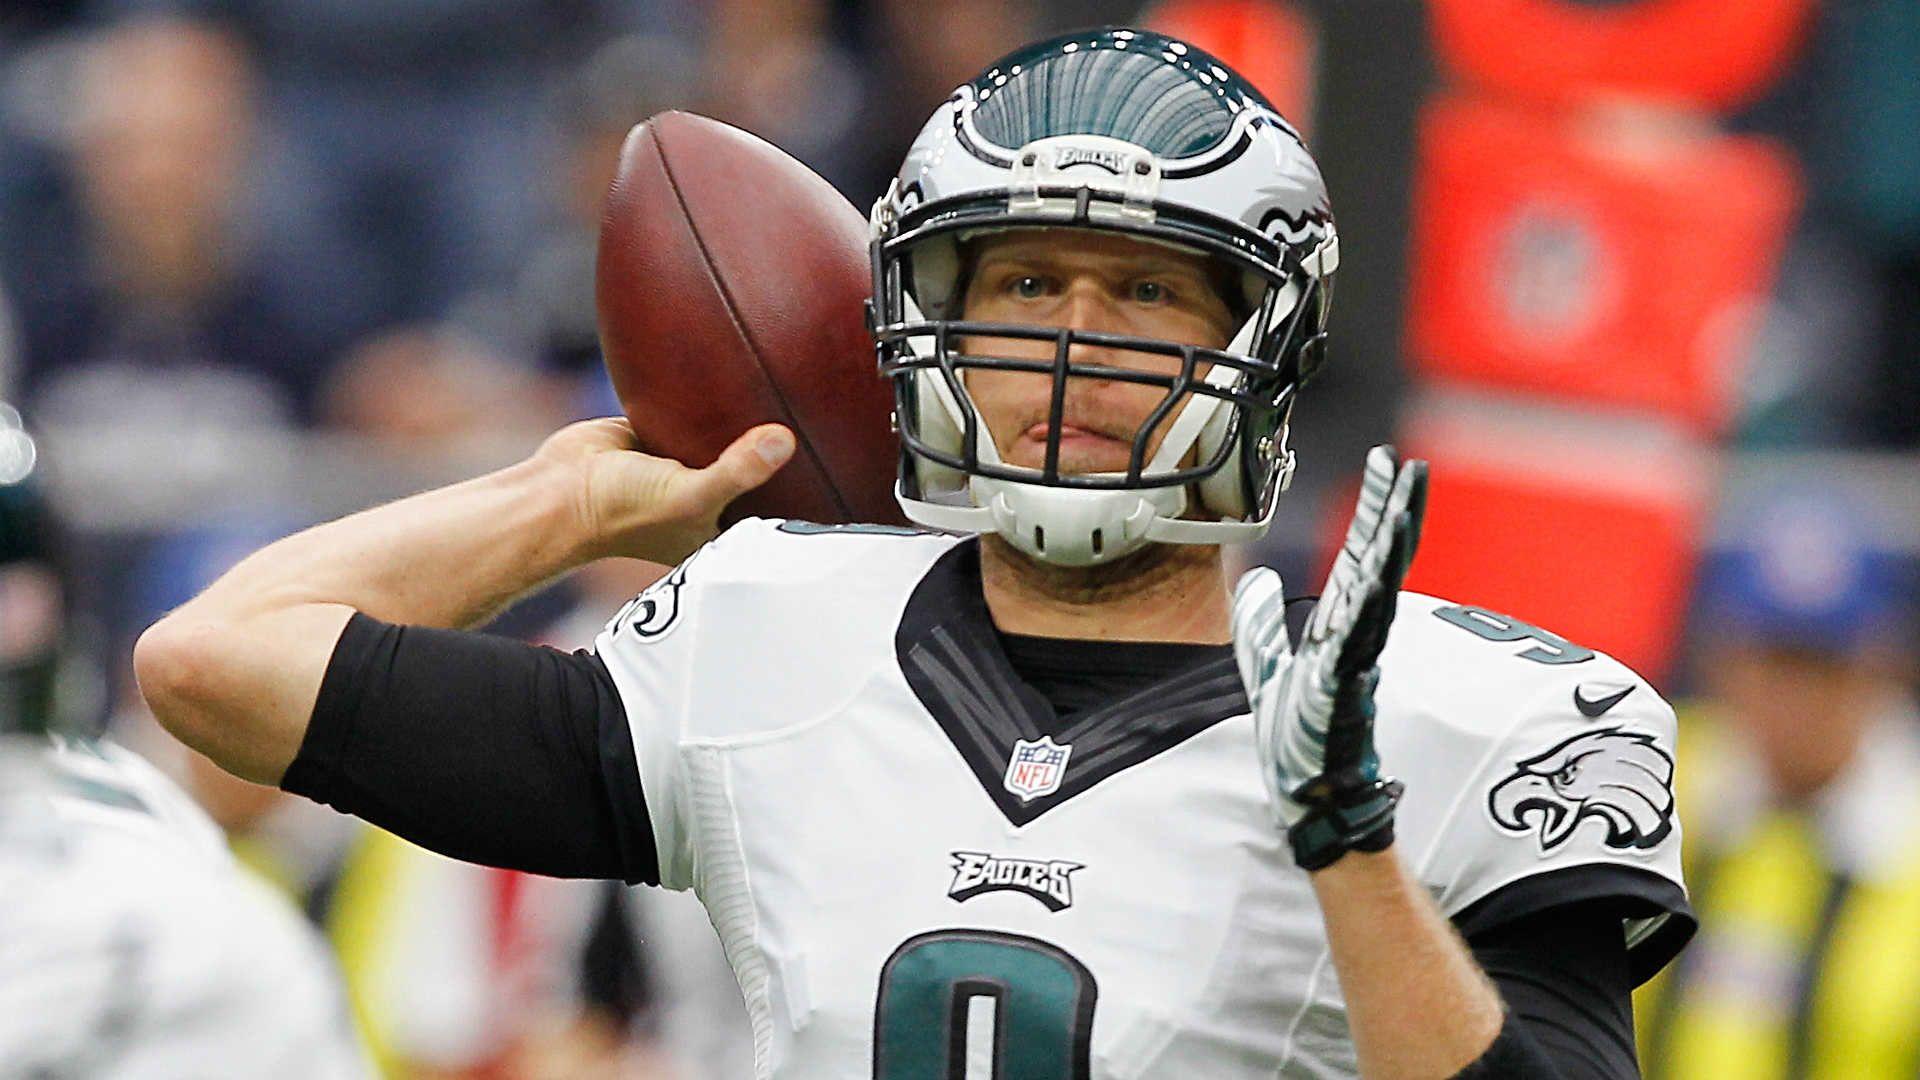 Nick Foles returning to the Eagles? Depends on who's reporting